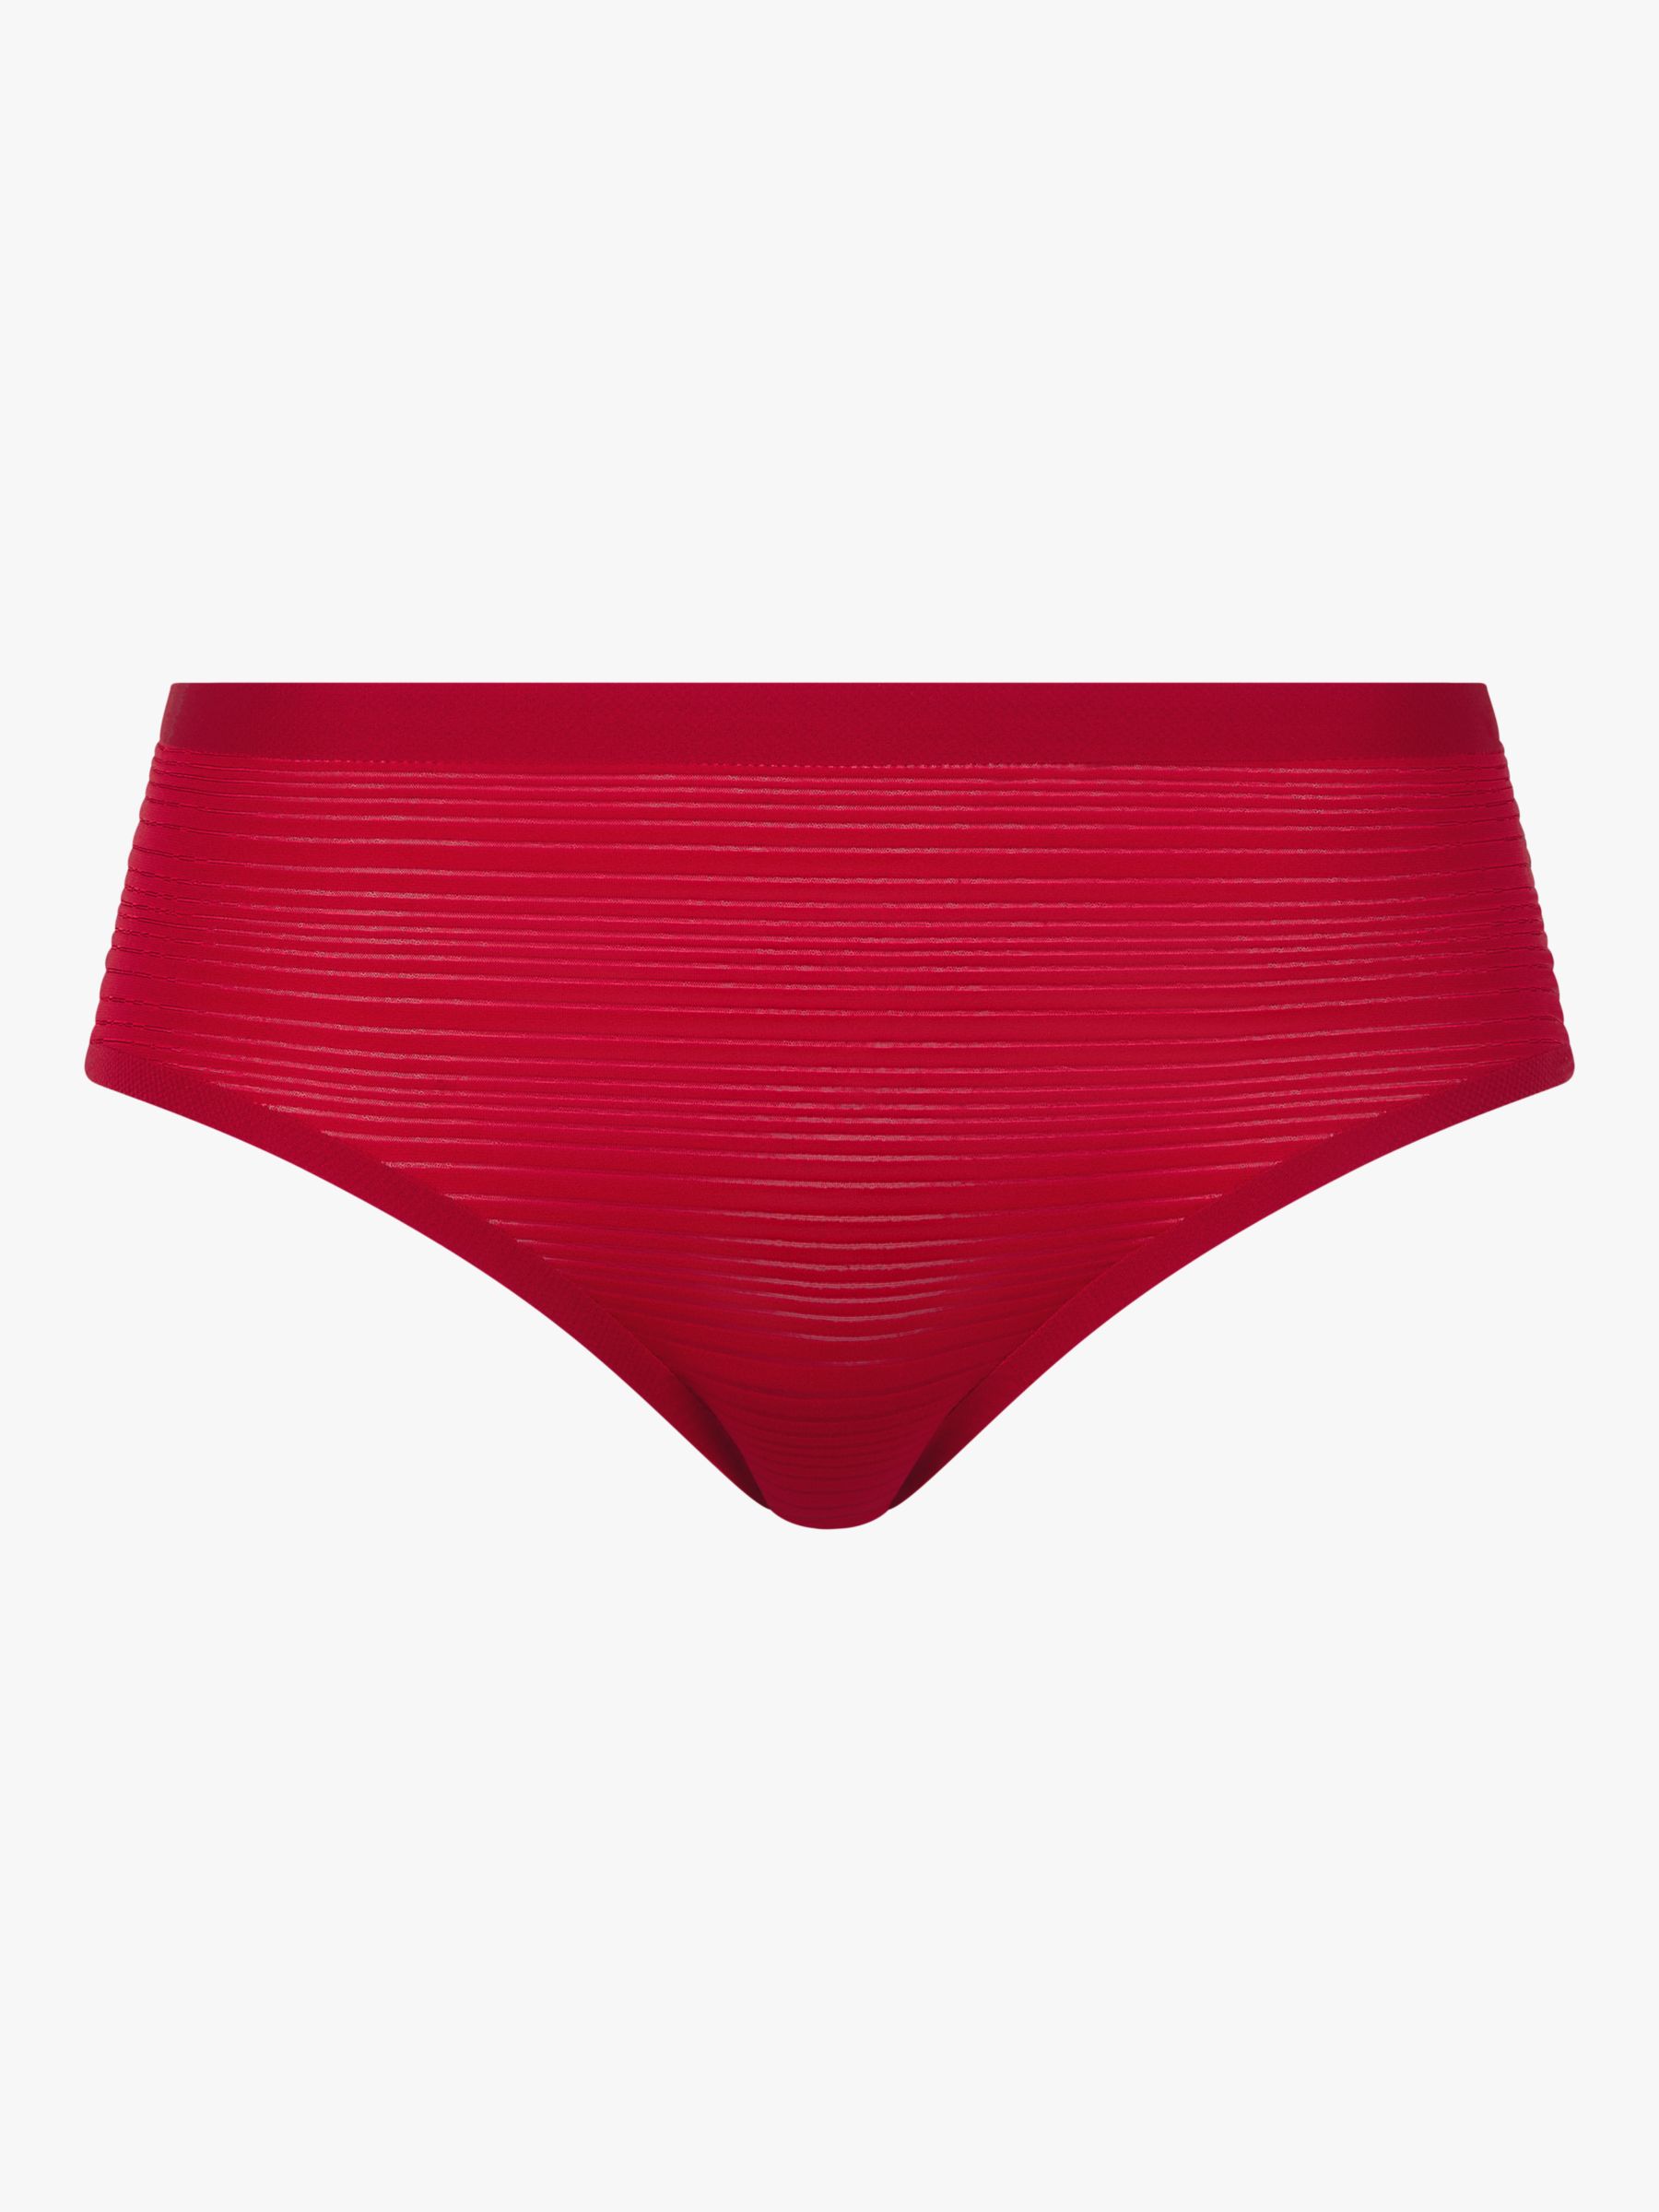 Buy Chantelle Soft Stretch Stripes Hipster Knickers Online at johnlewis.com